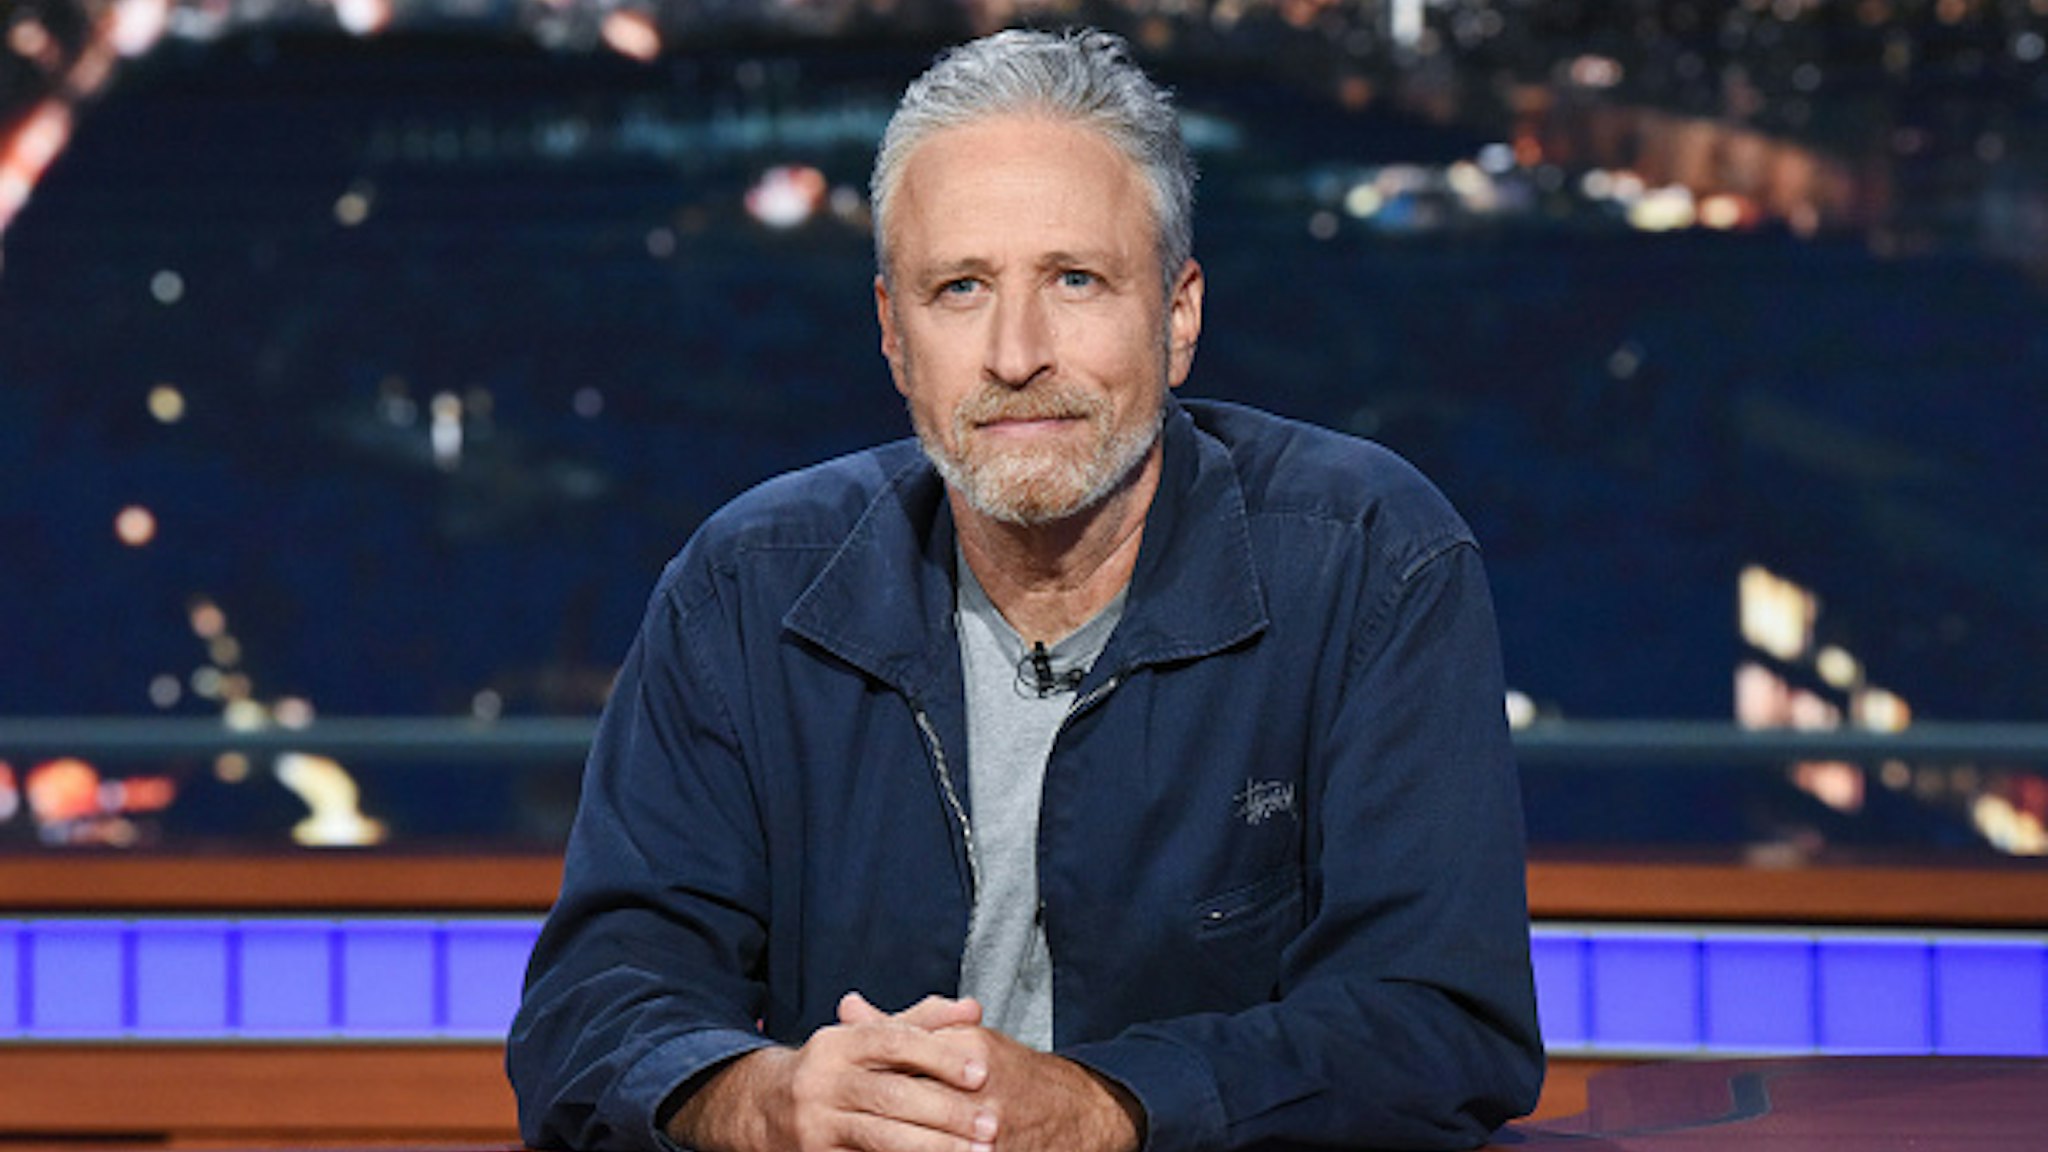 NEW YORK - JUNE 17: The Late Show with Stephen Colbert and guest Jon Stewart during Monday's June 17, 2019 show.